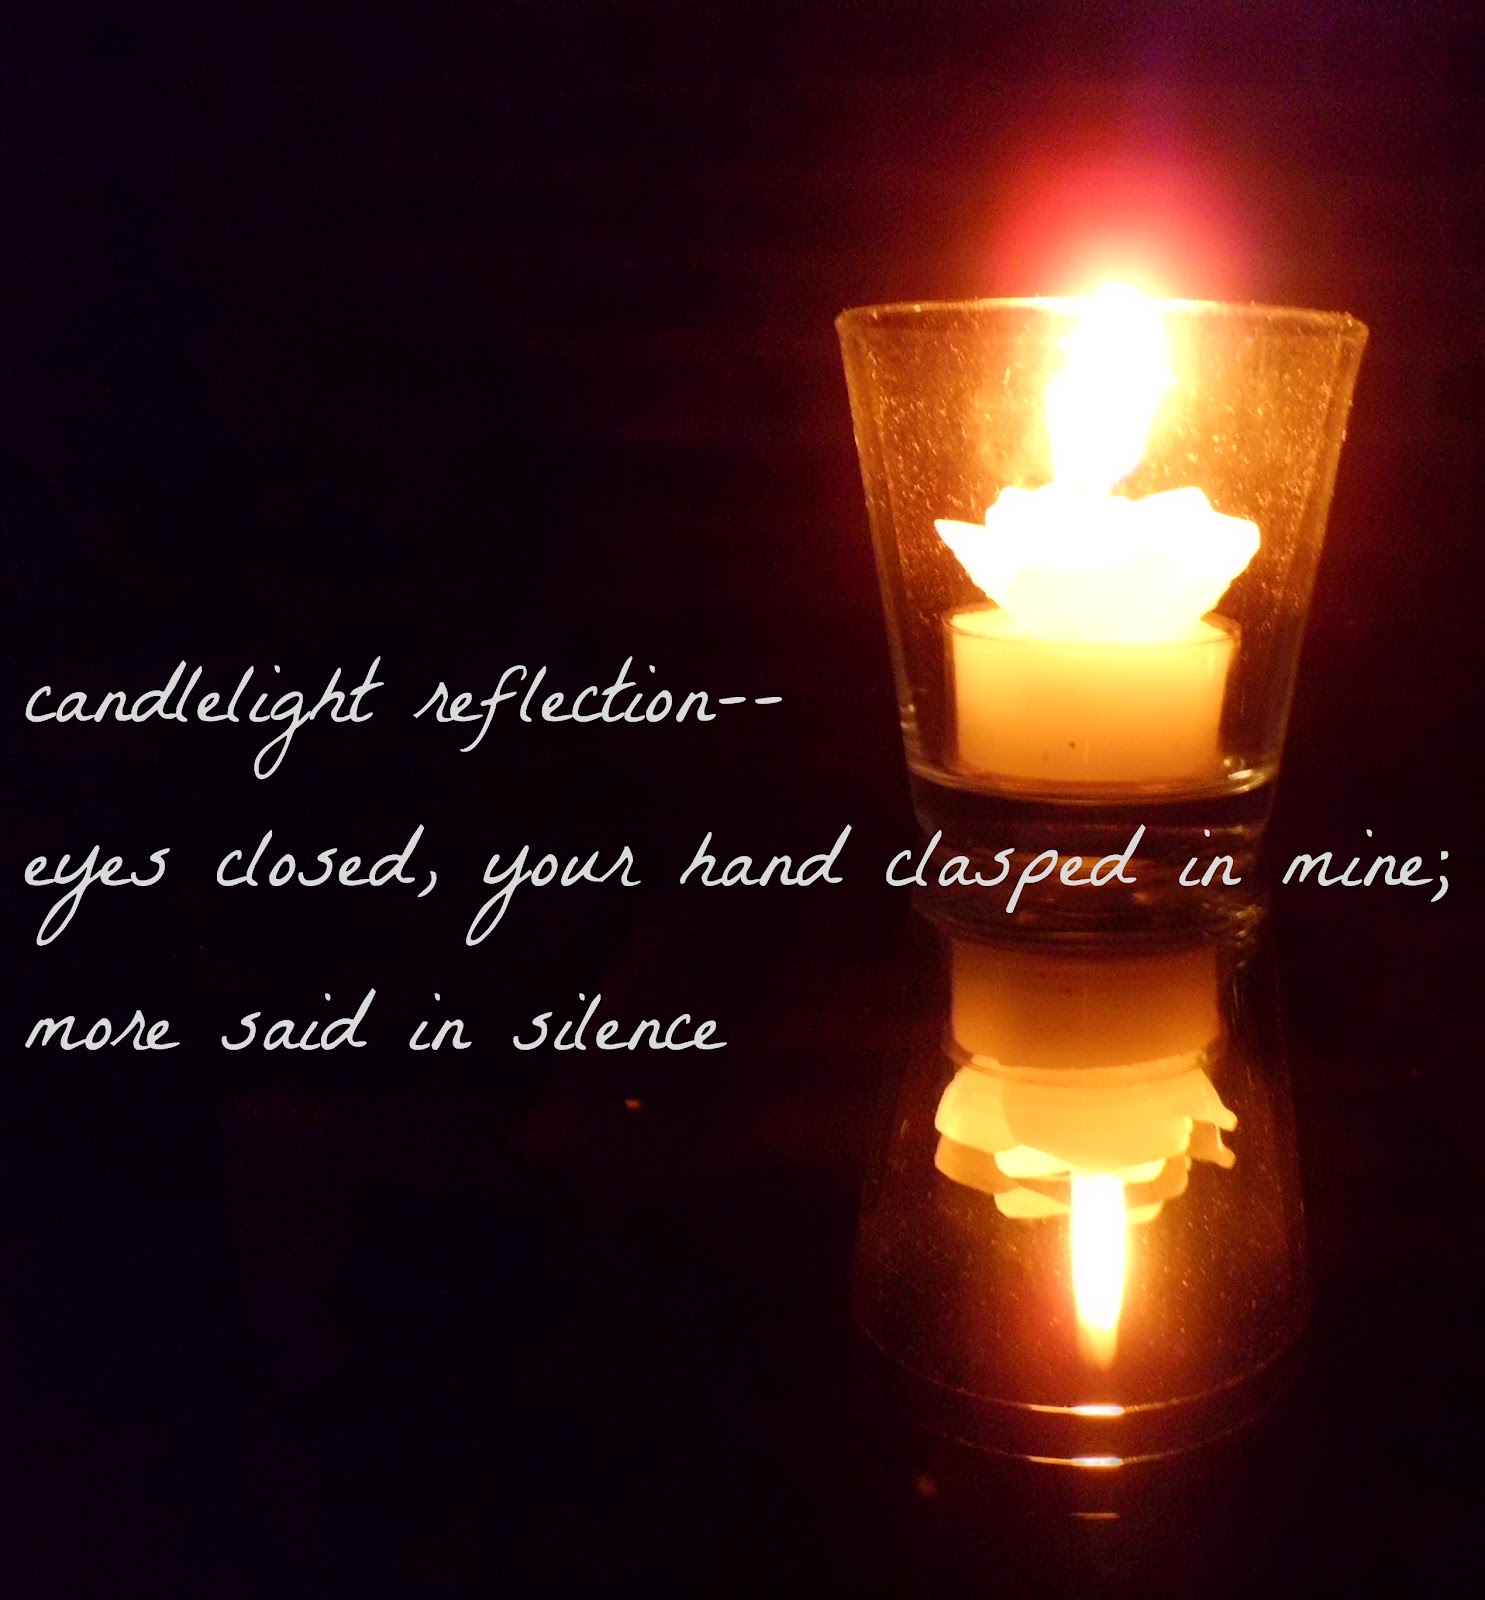 Candlelight Quotes.